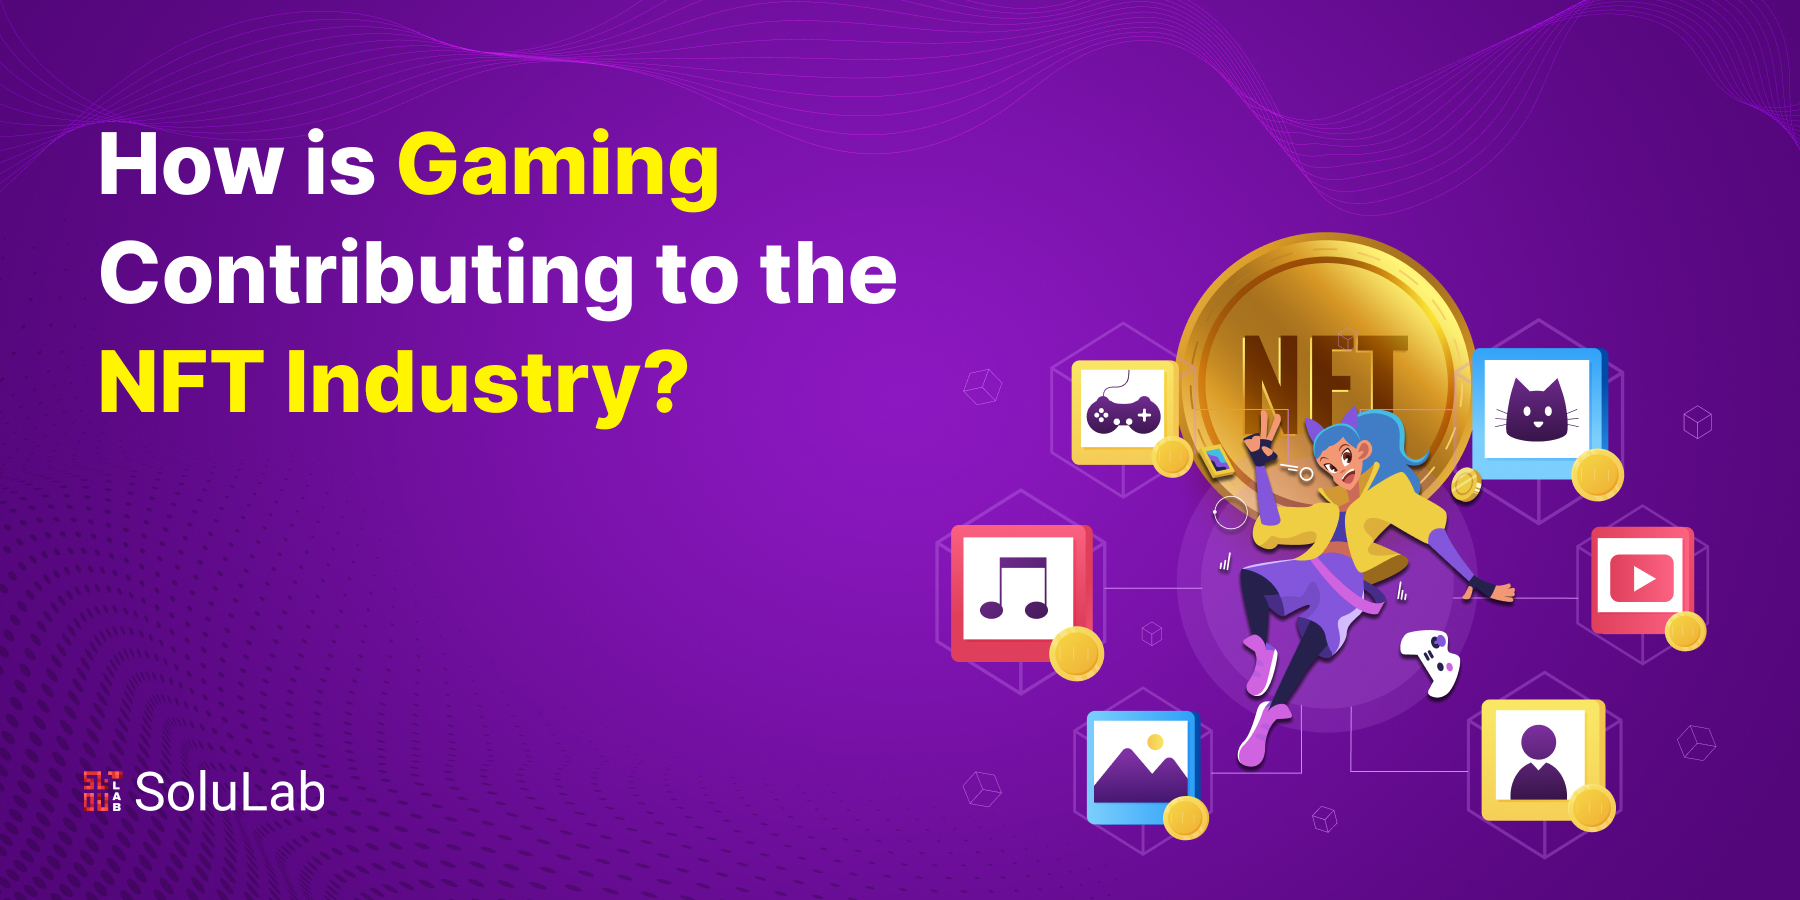 How is Gaming Contributing to the NFT Industry?